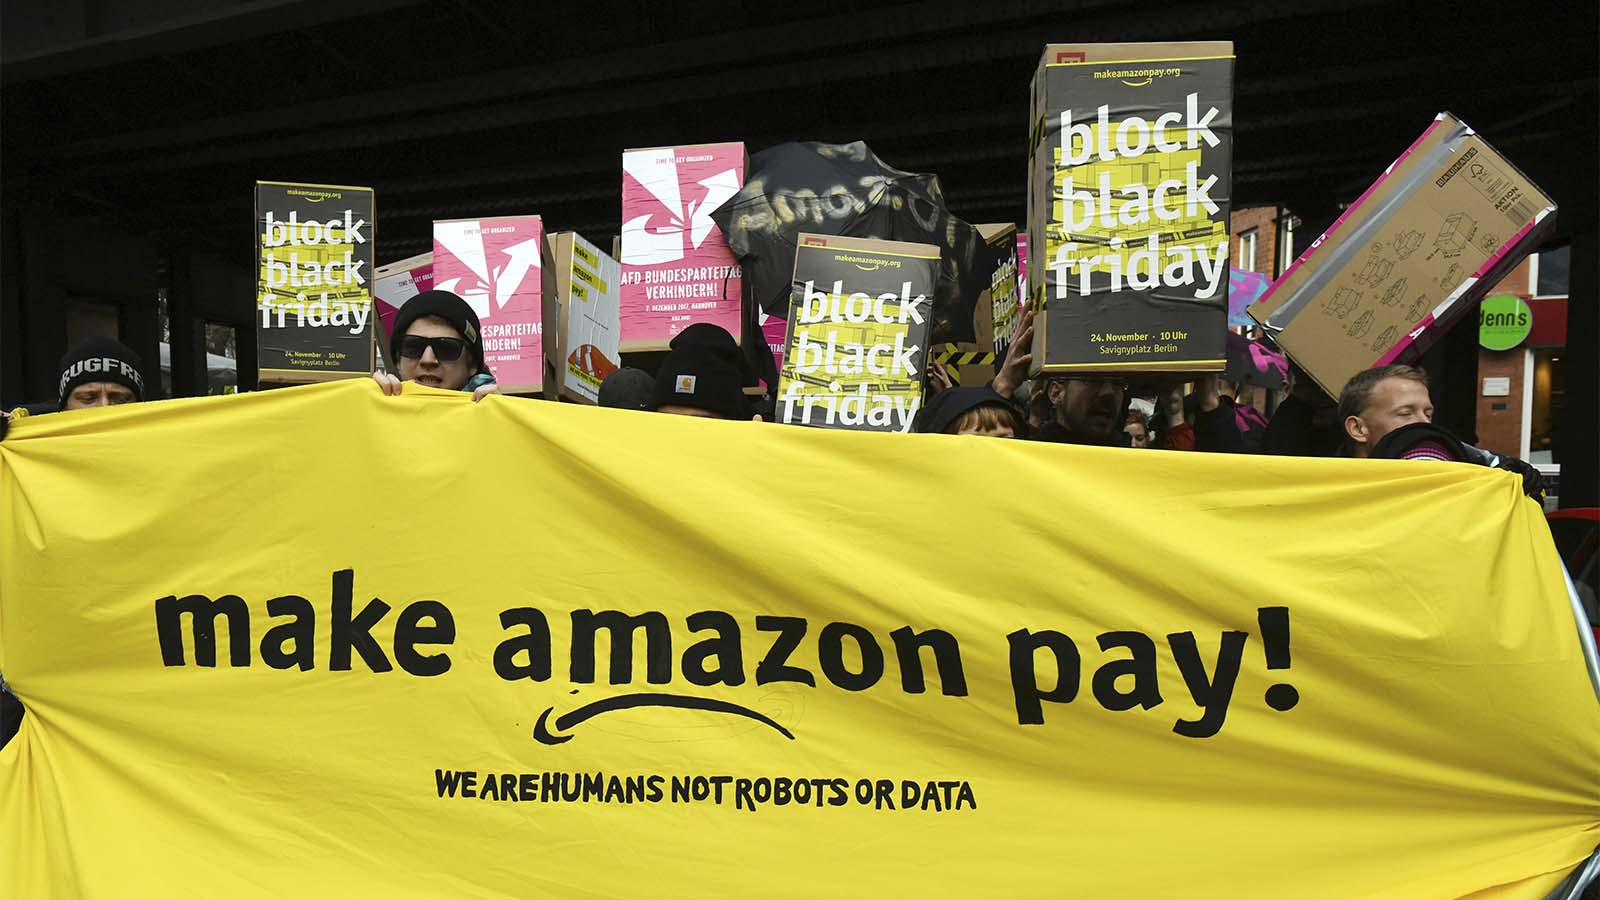 Amazon workers in Germany protesting their working conditions on Black Friday November 24th (צילום: Sebastian Willnow/dpa via AP)